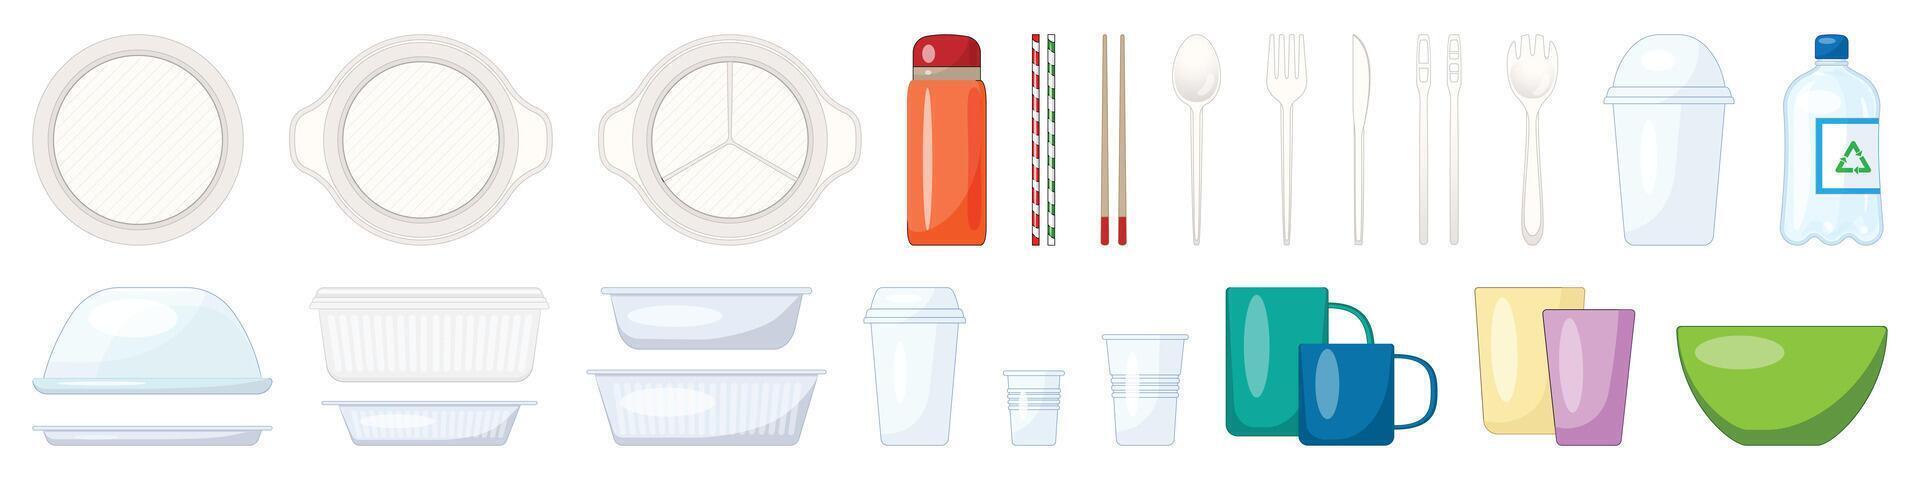 Plastic tableware cartoon icons. A collection of disposable dinnerware and utensils vector